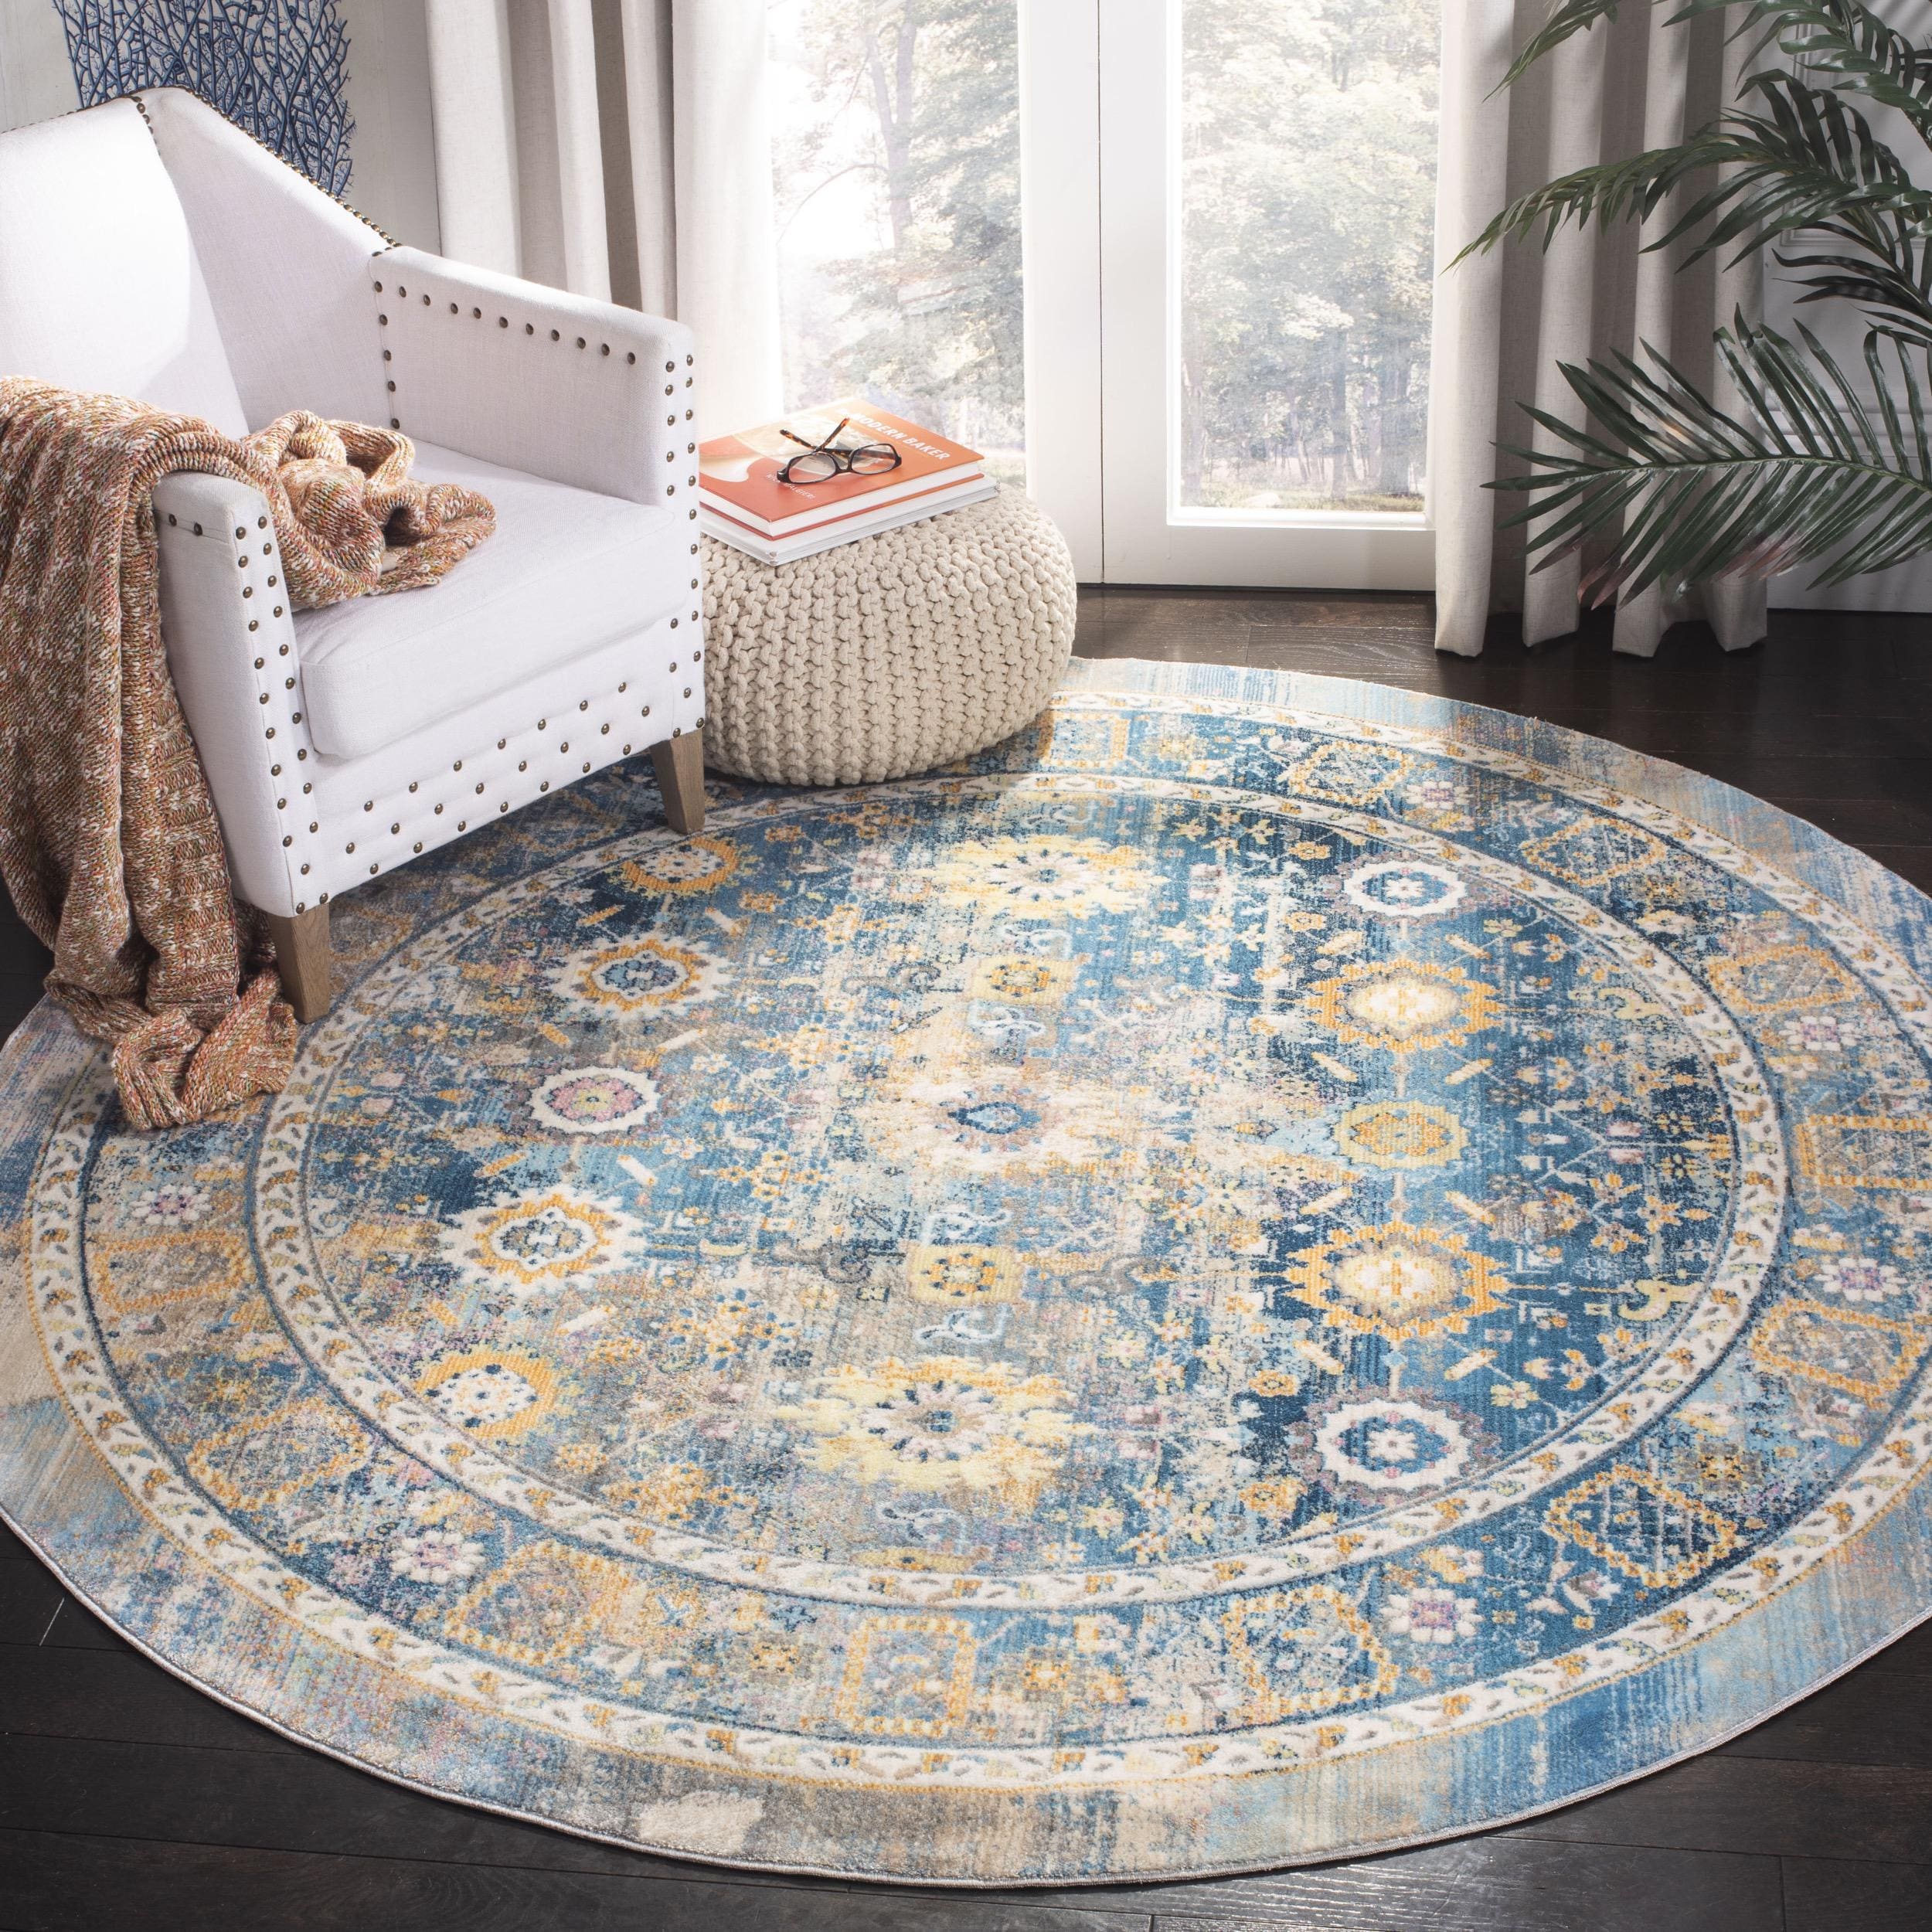 save an extra 20% on Select Rugs*